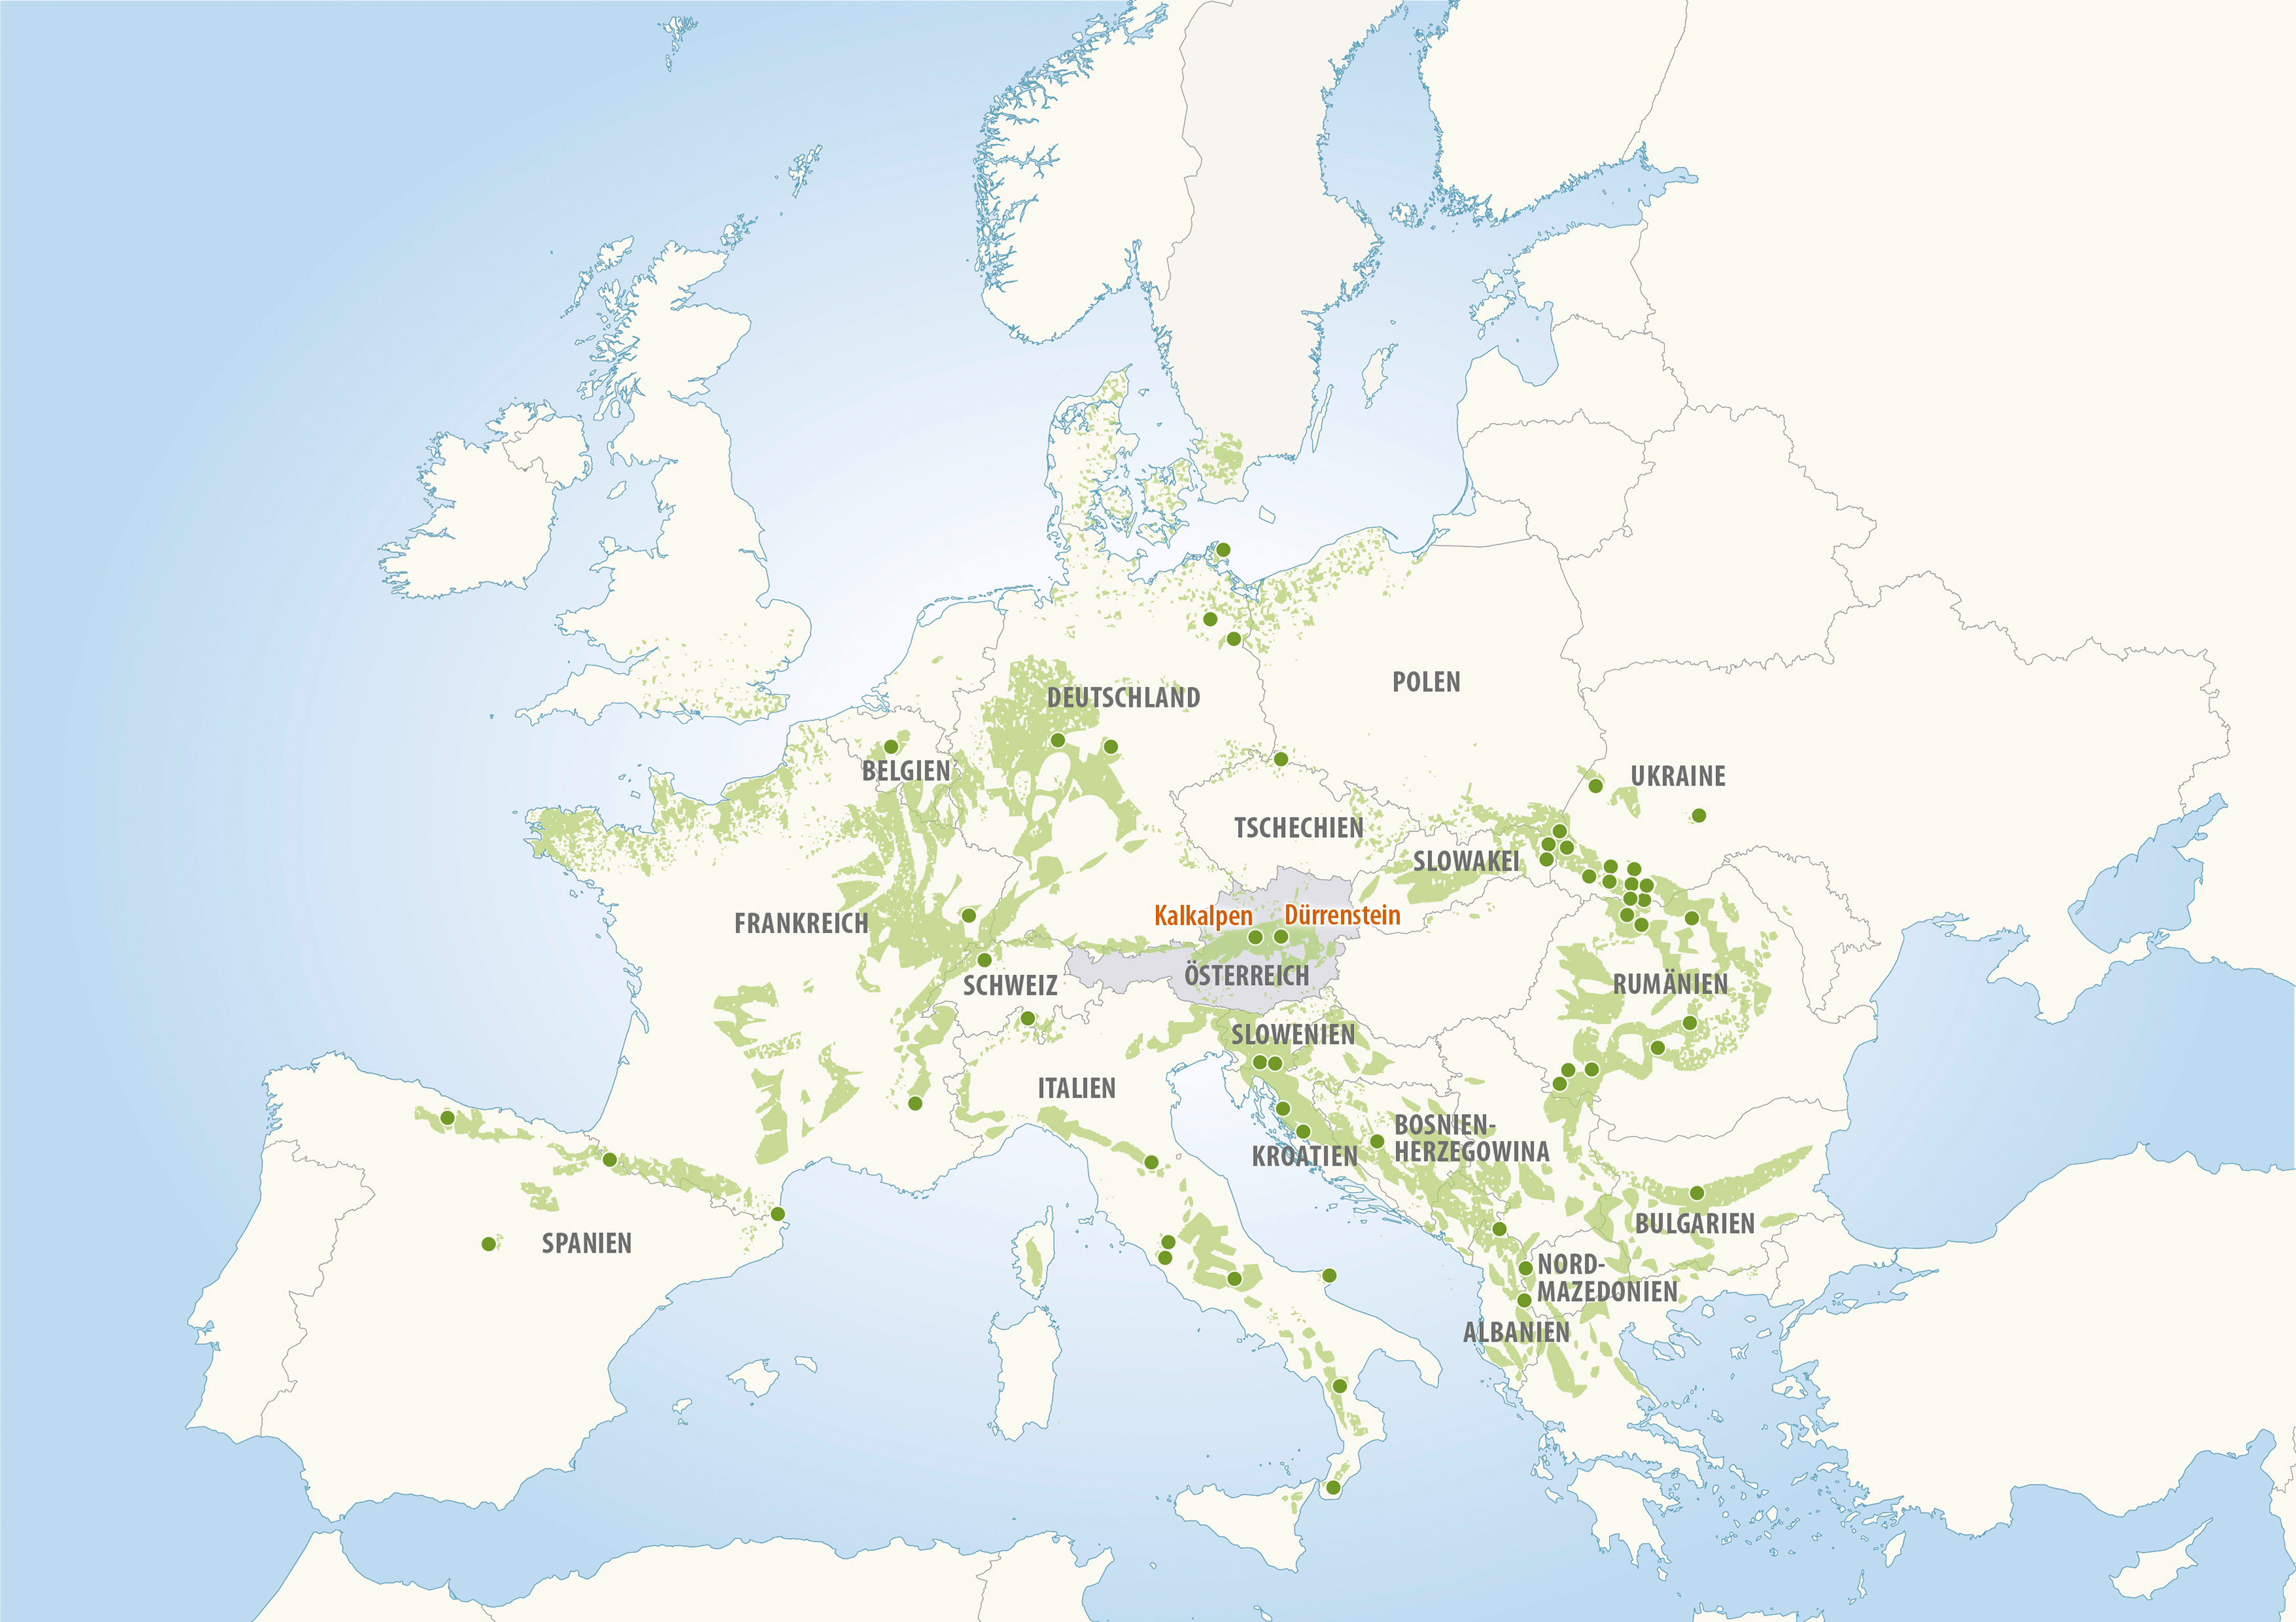 Overview map of Europe's World Heritage beech forests